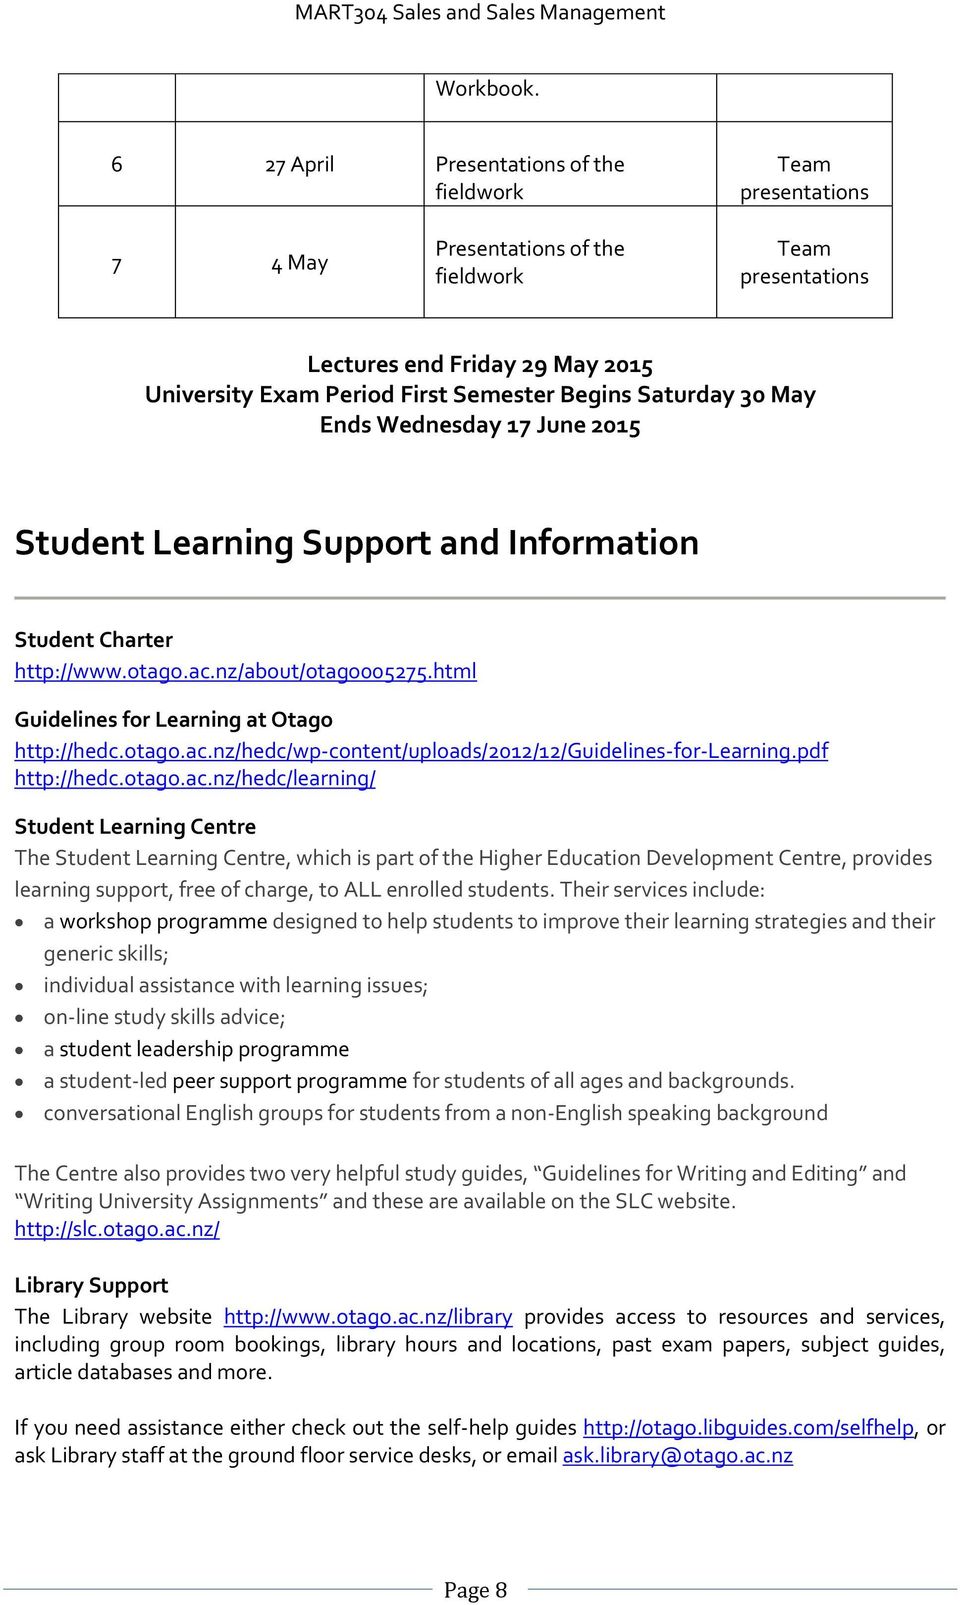 Saturday 30 May Ends Wednesday 17 June 2015 Student Learning Support and Information Student Charter http://www.otago.ac.nz/about/otago005275.html Guidelines for Learning at Otago http://hedc.otago.ac.nz/hedc/wp-content/uploads/2012/12/guidelines-for-learning.